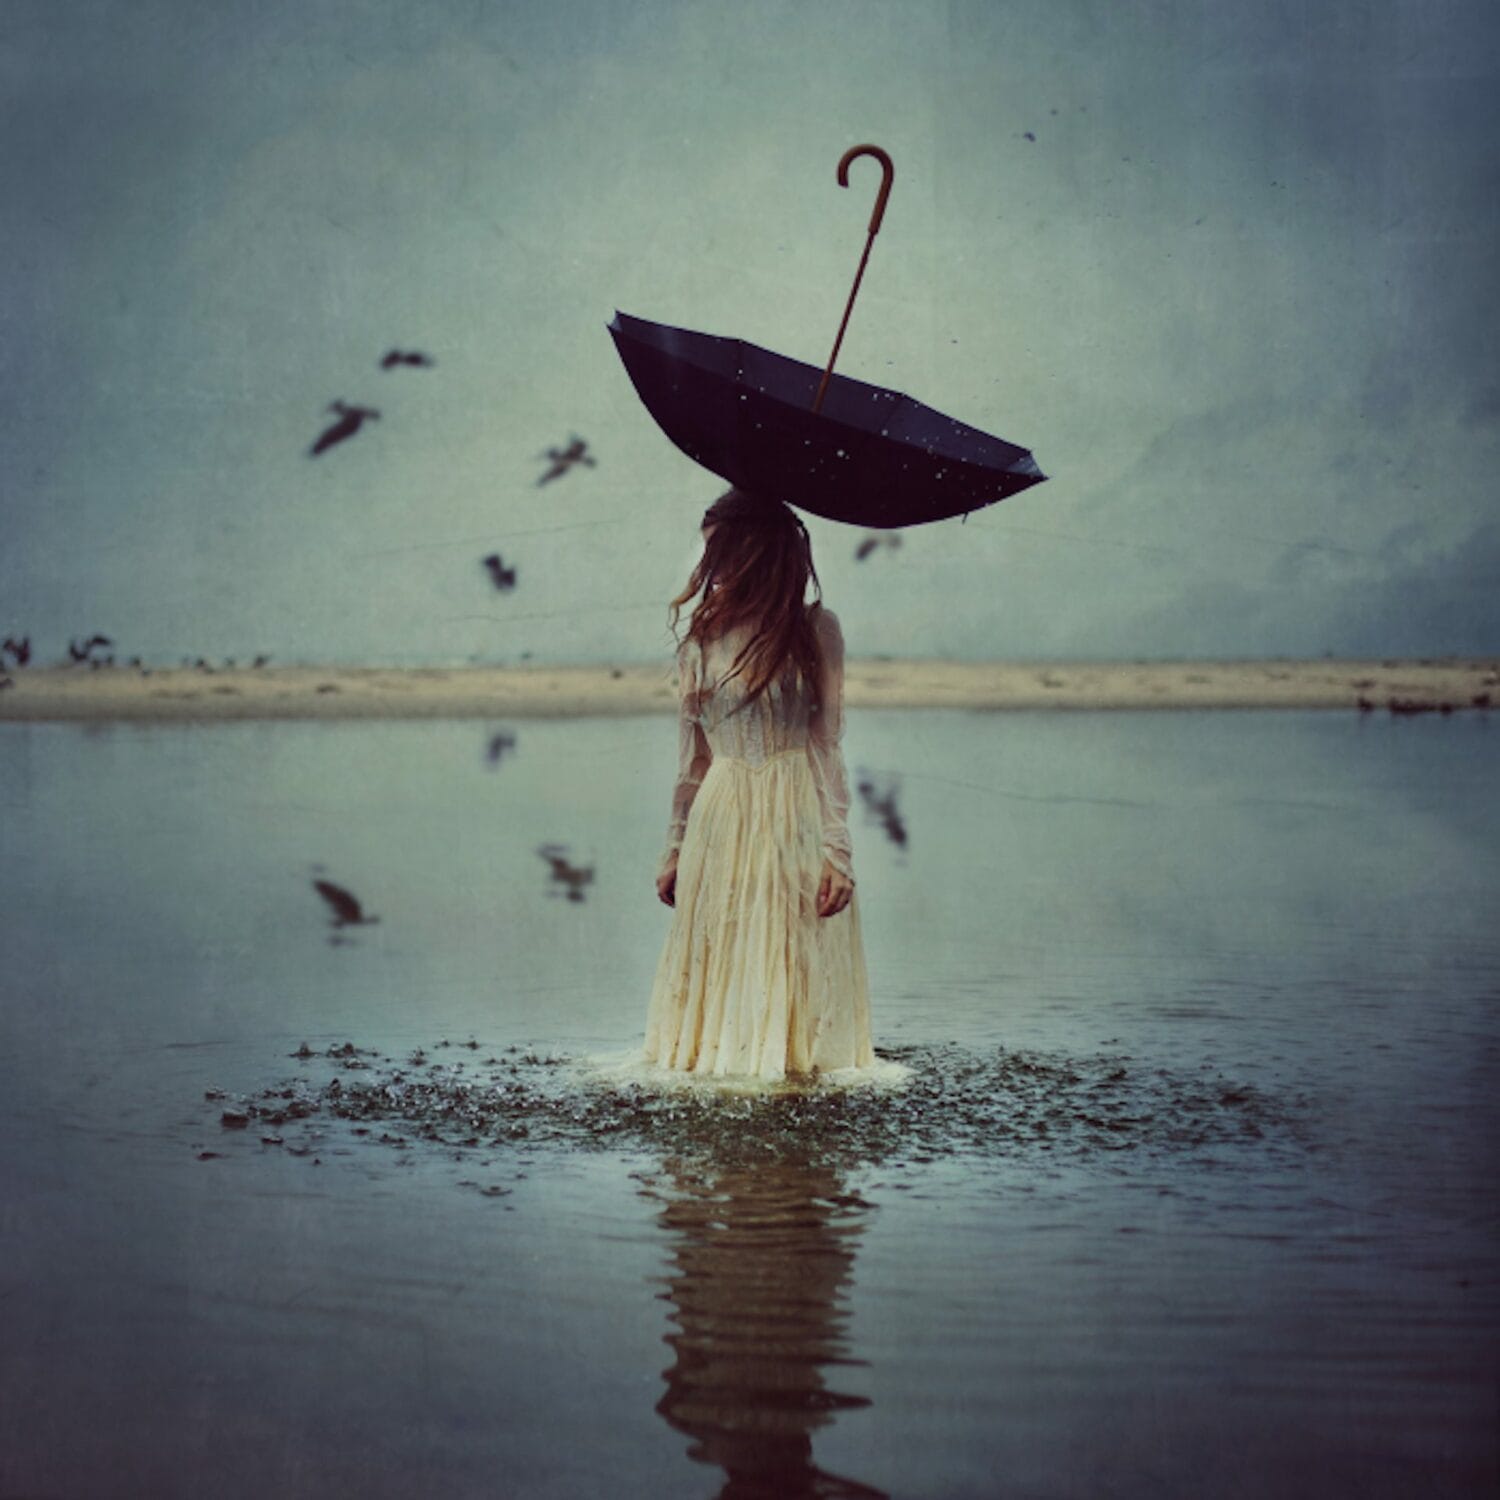 Brooke Shaden The World Above, 2011 Edition of 10 Photograph on Velvet Fine Art Paper 20 x 20 inches